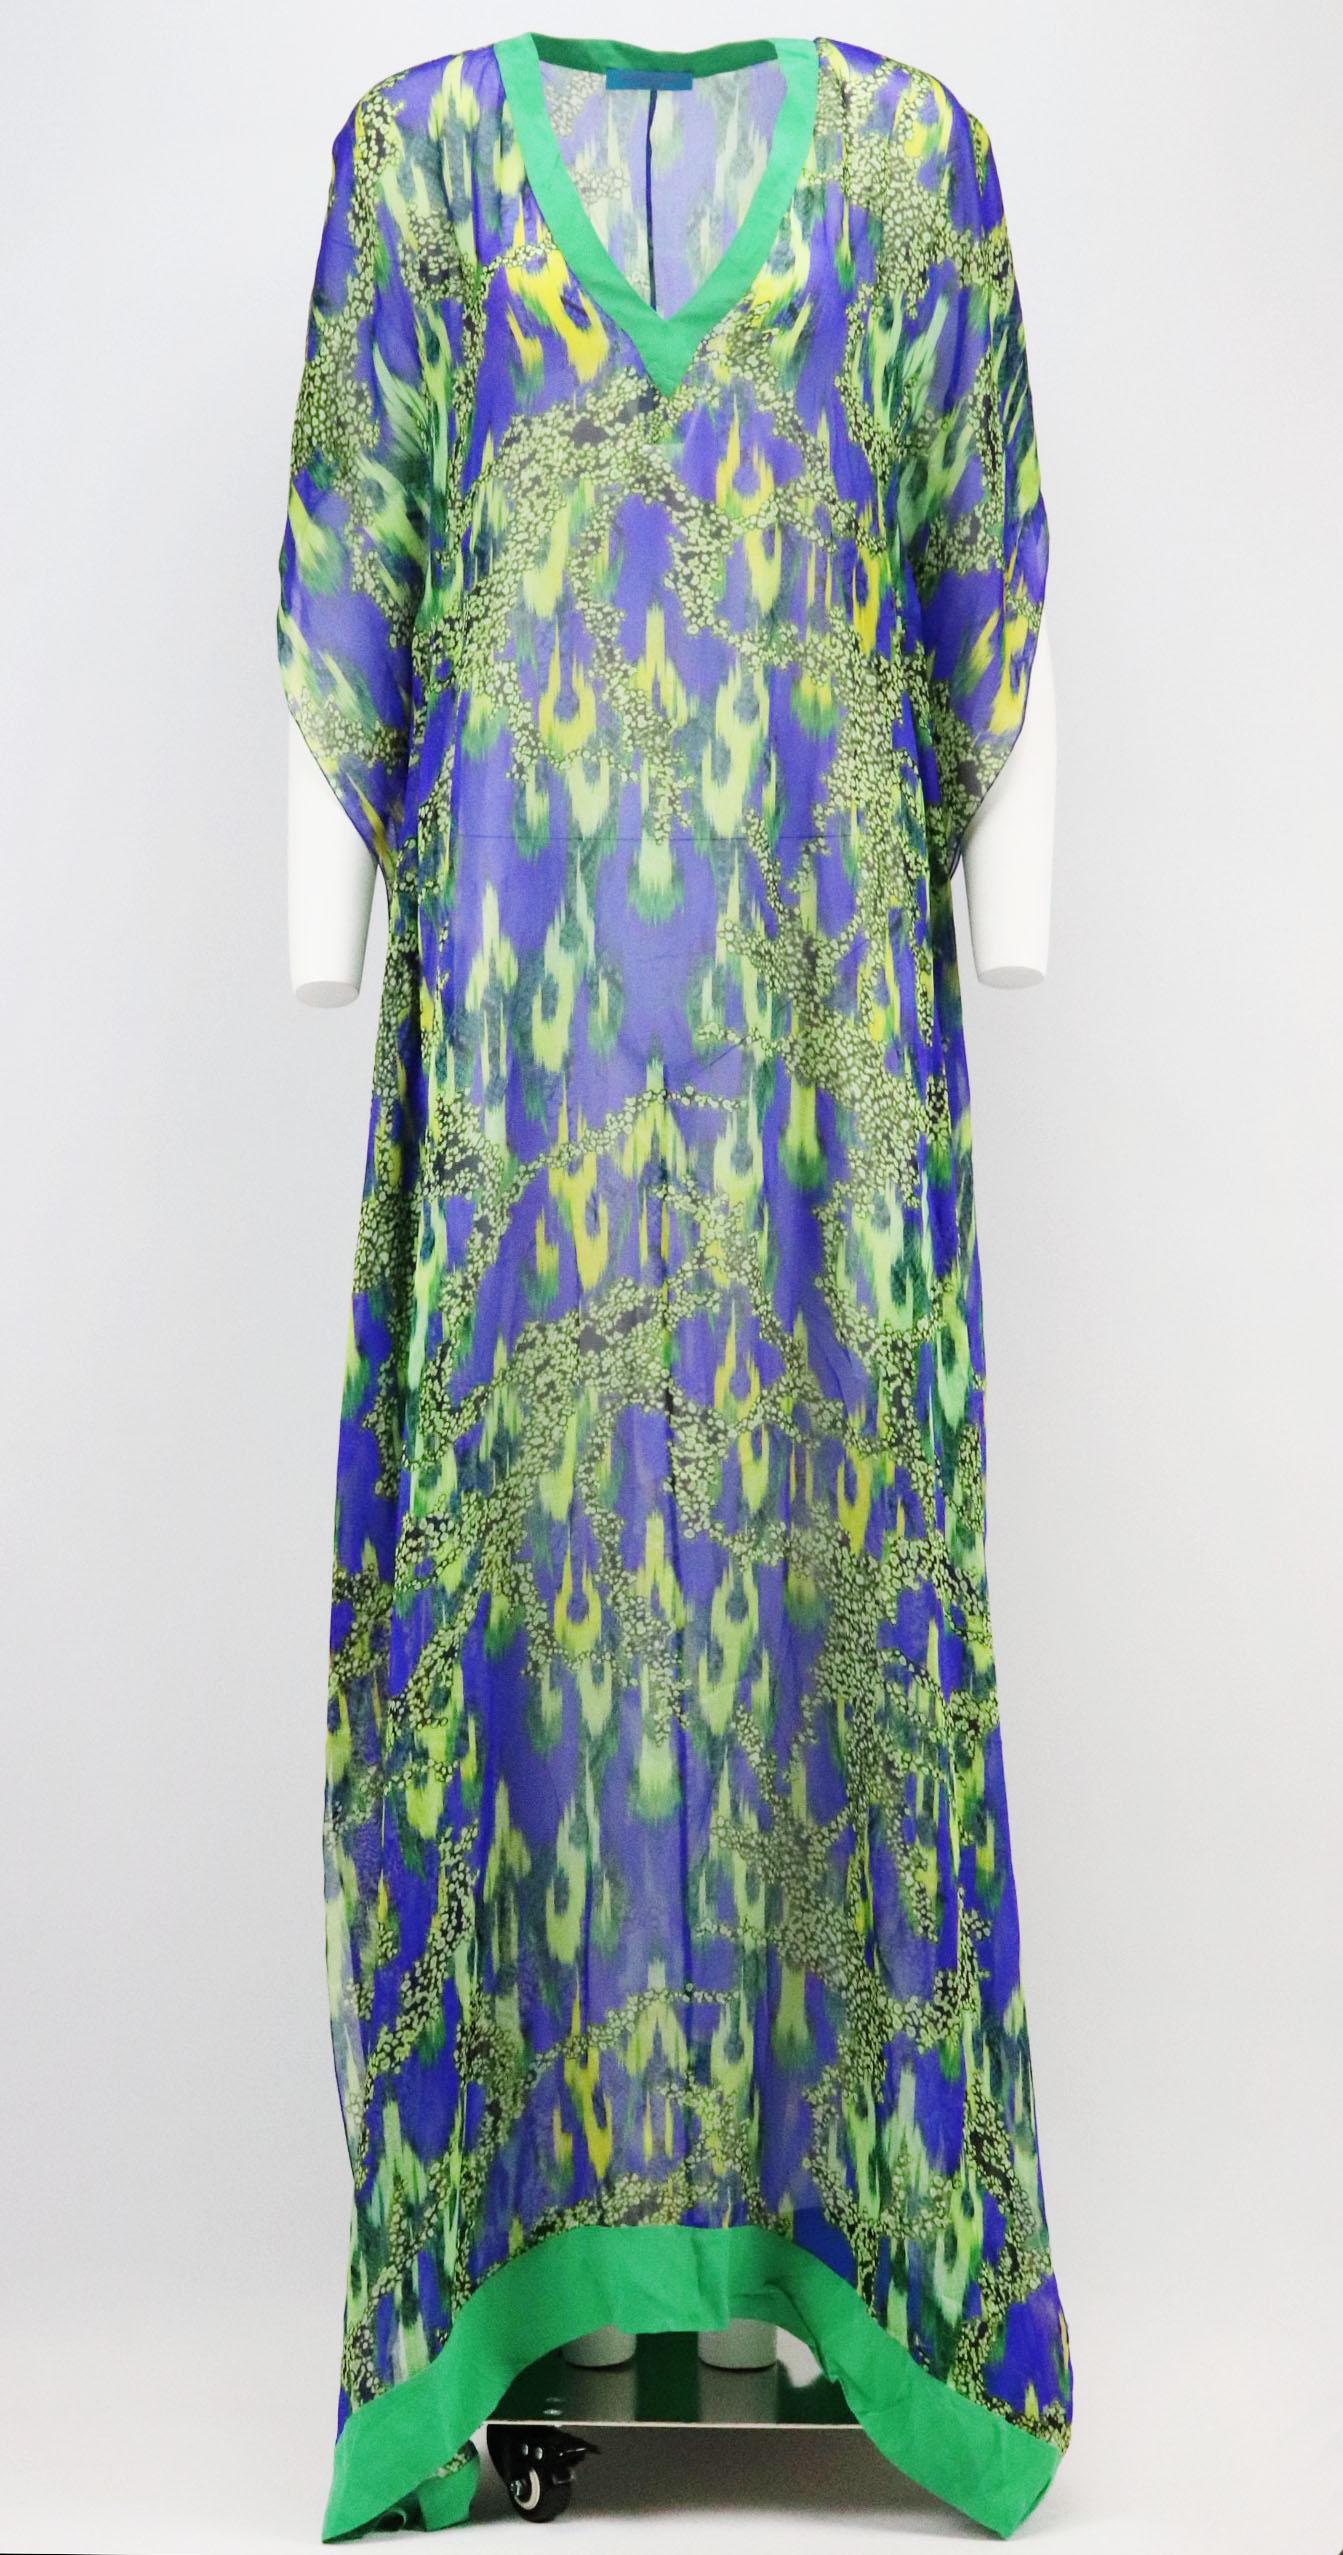 Matthew Williamson Escape kaftan are vibrant and playful, cut from silk-georgette, this maxi dress is alive with marine-like motifs and has loose silhouette that moves with the wind.
Green, yellow and blue silk-georgette.
Slips on.
100% Silk.

Size: